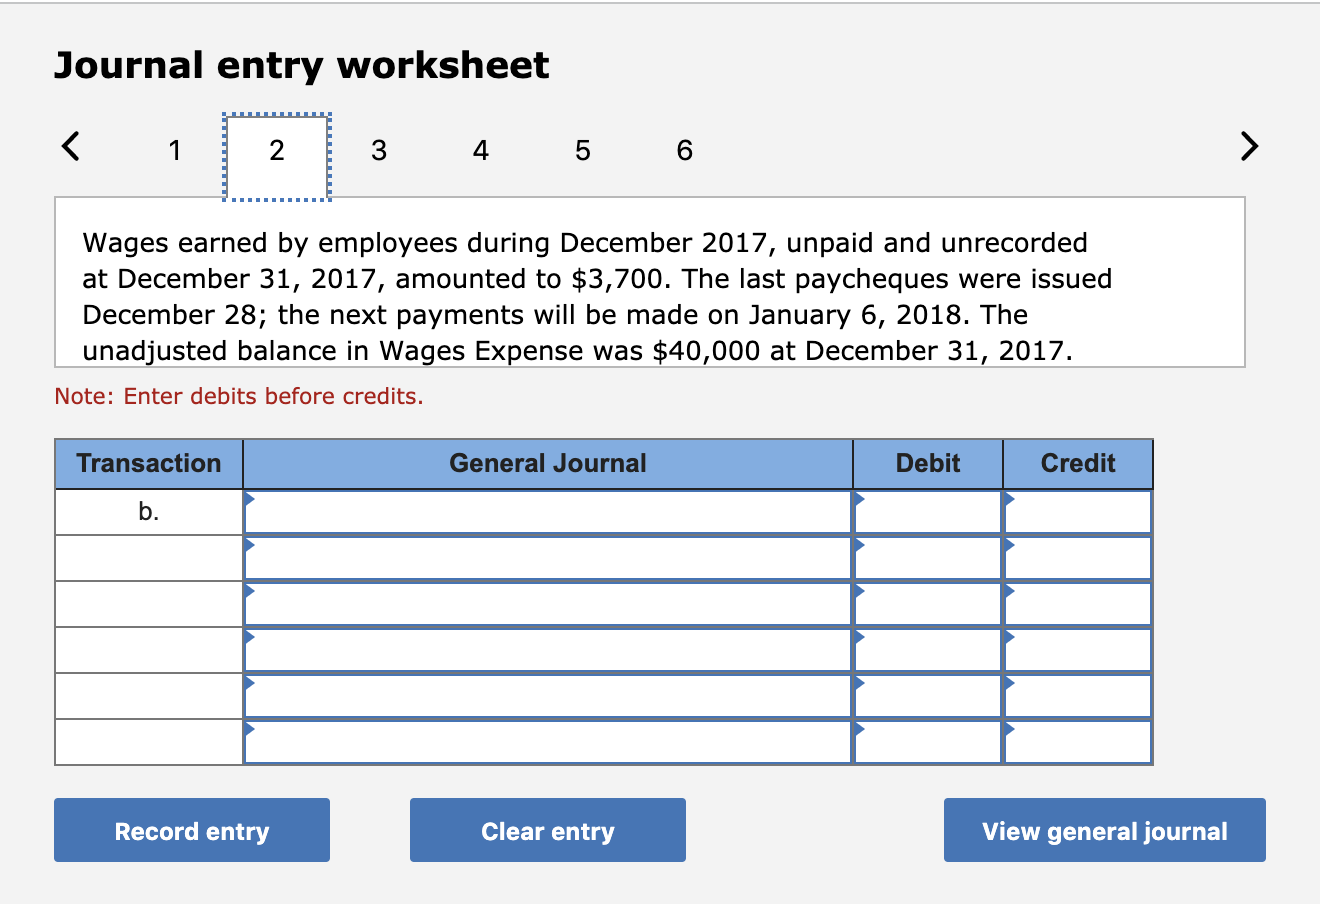 Journal entry worksheet 1 2 3 4 5 6 wages earned by employees during december 2017, unpaid and unrecorded at december 31, 201